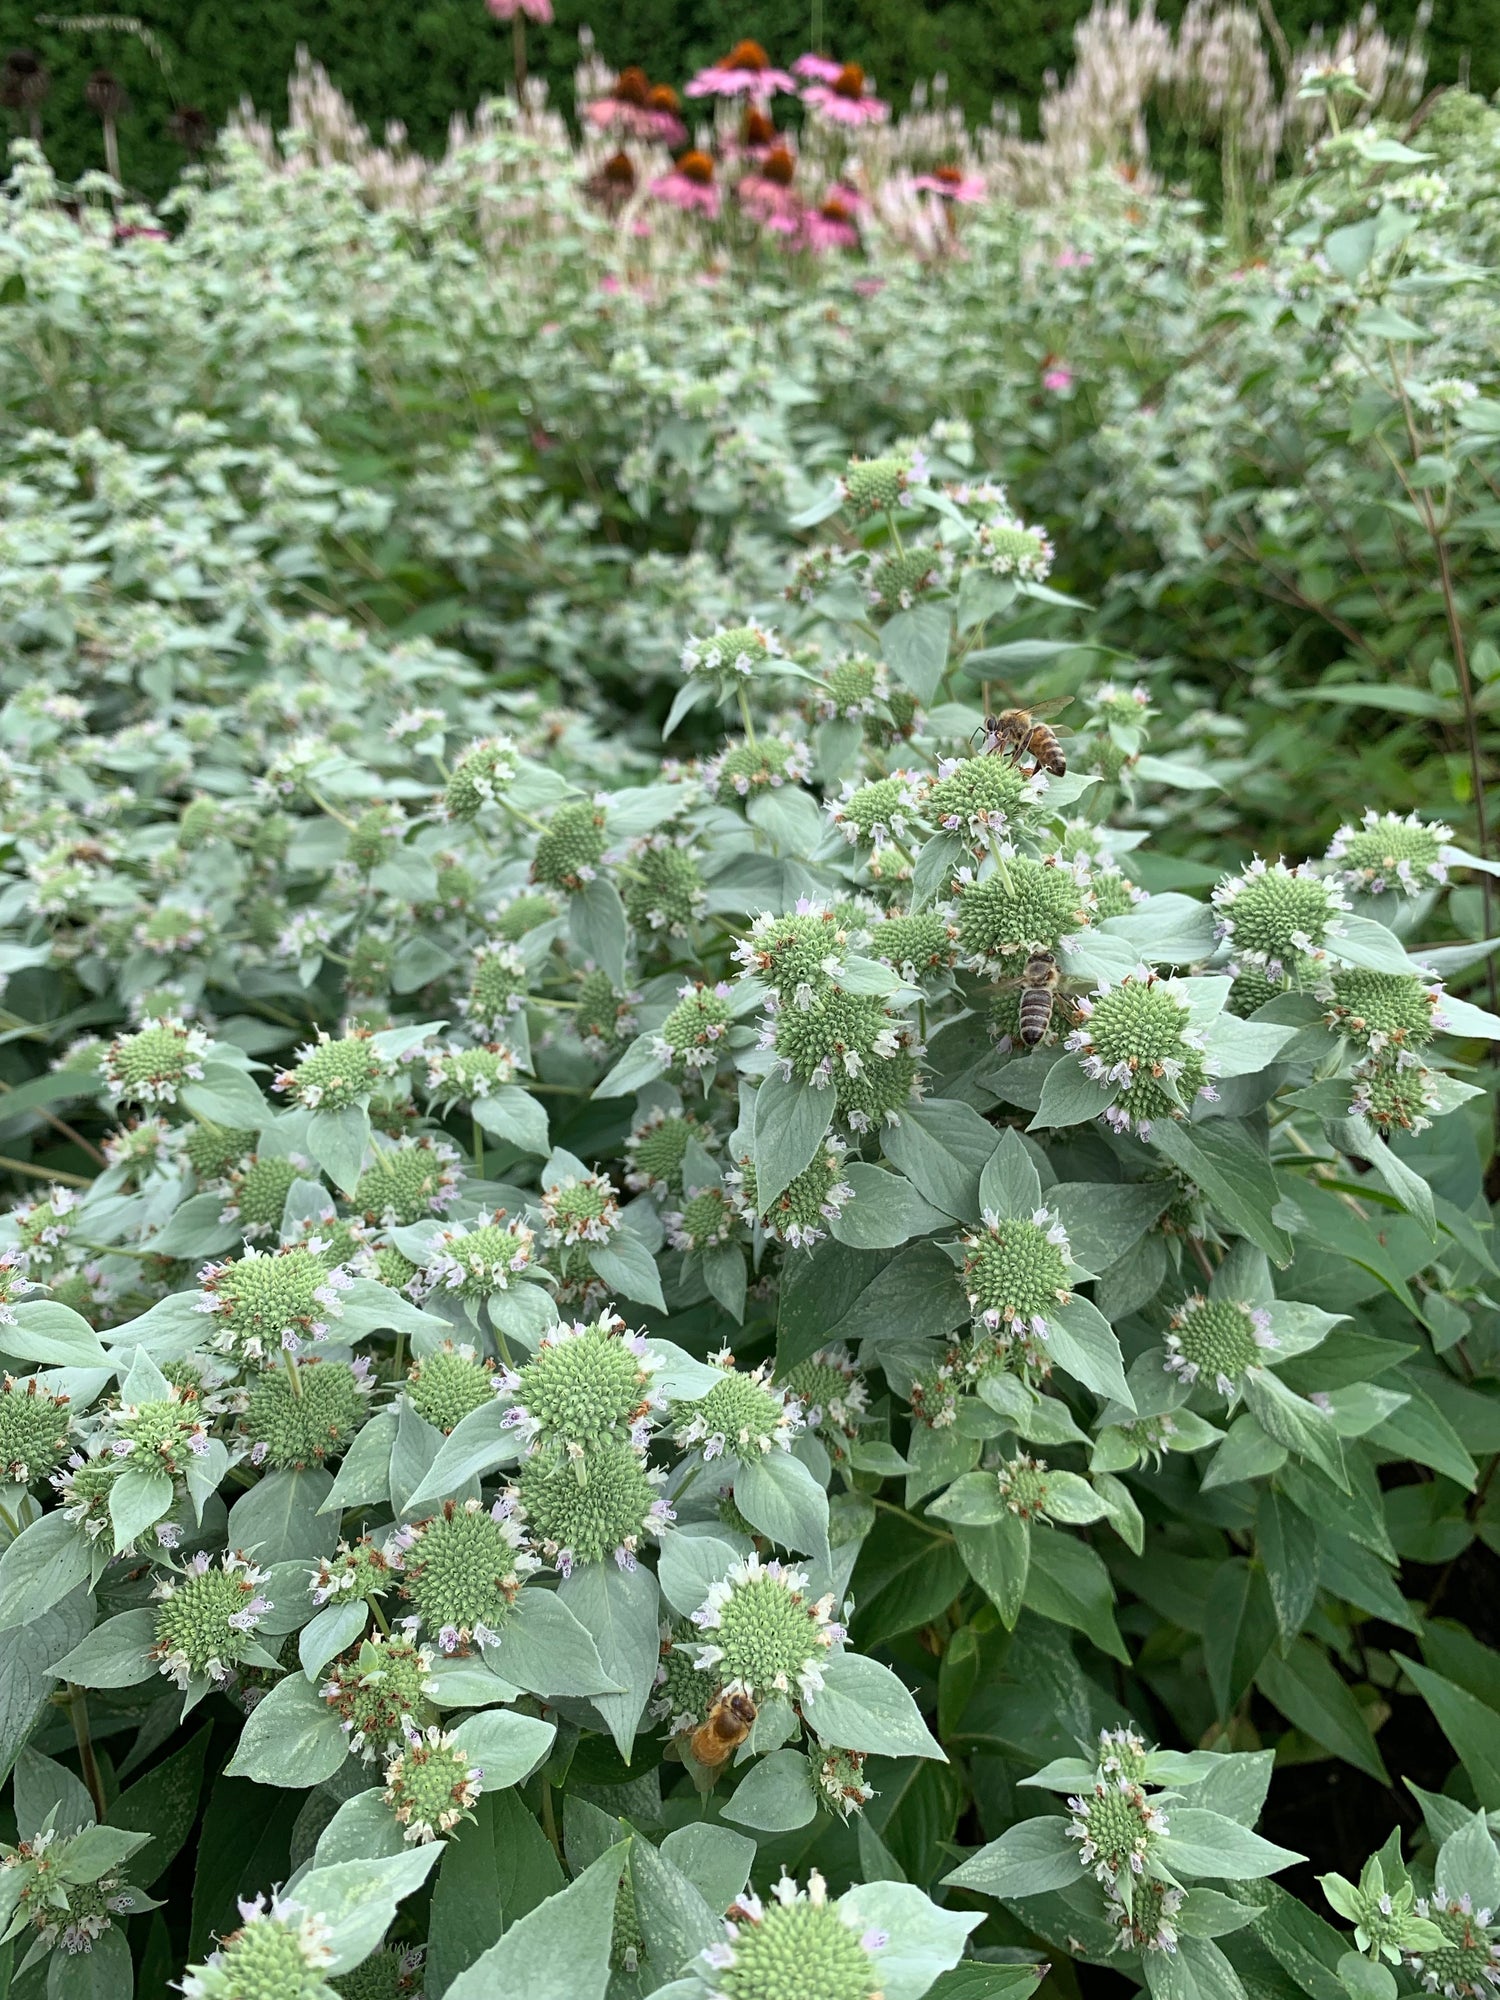 A large patch of blunt mountain mint, pycnanthemu muticum, in Chicago&